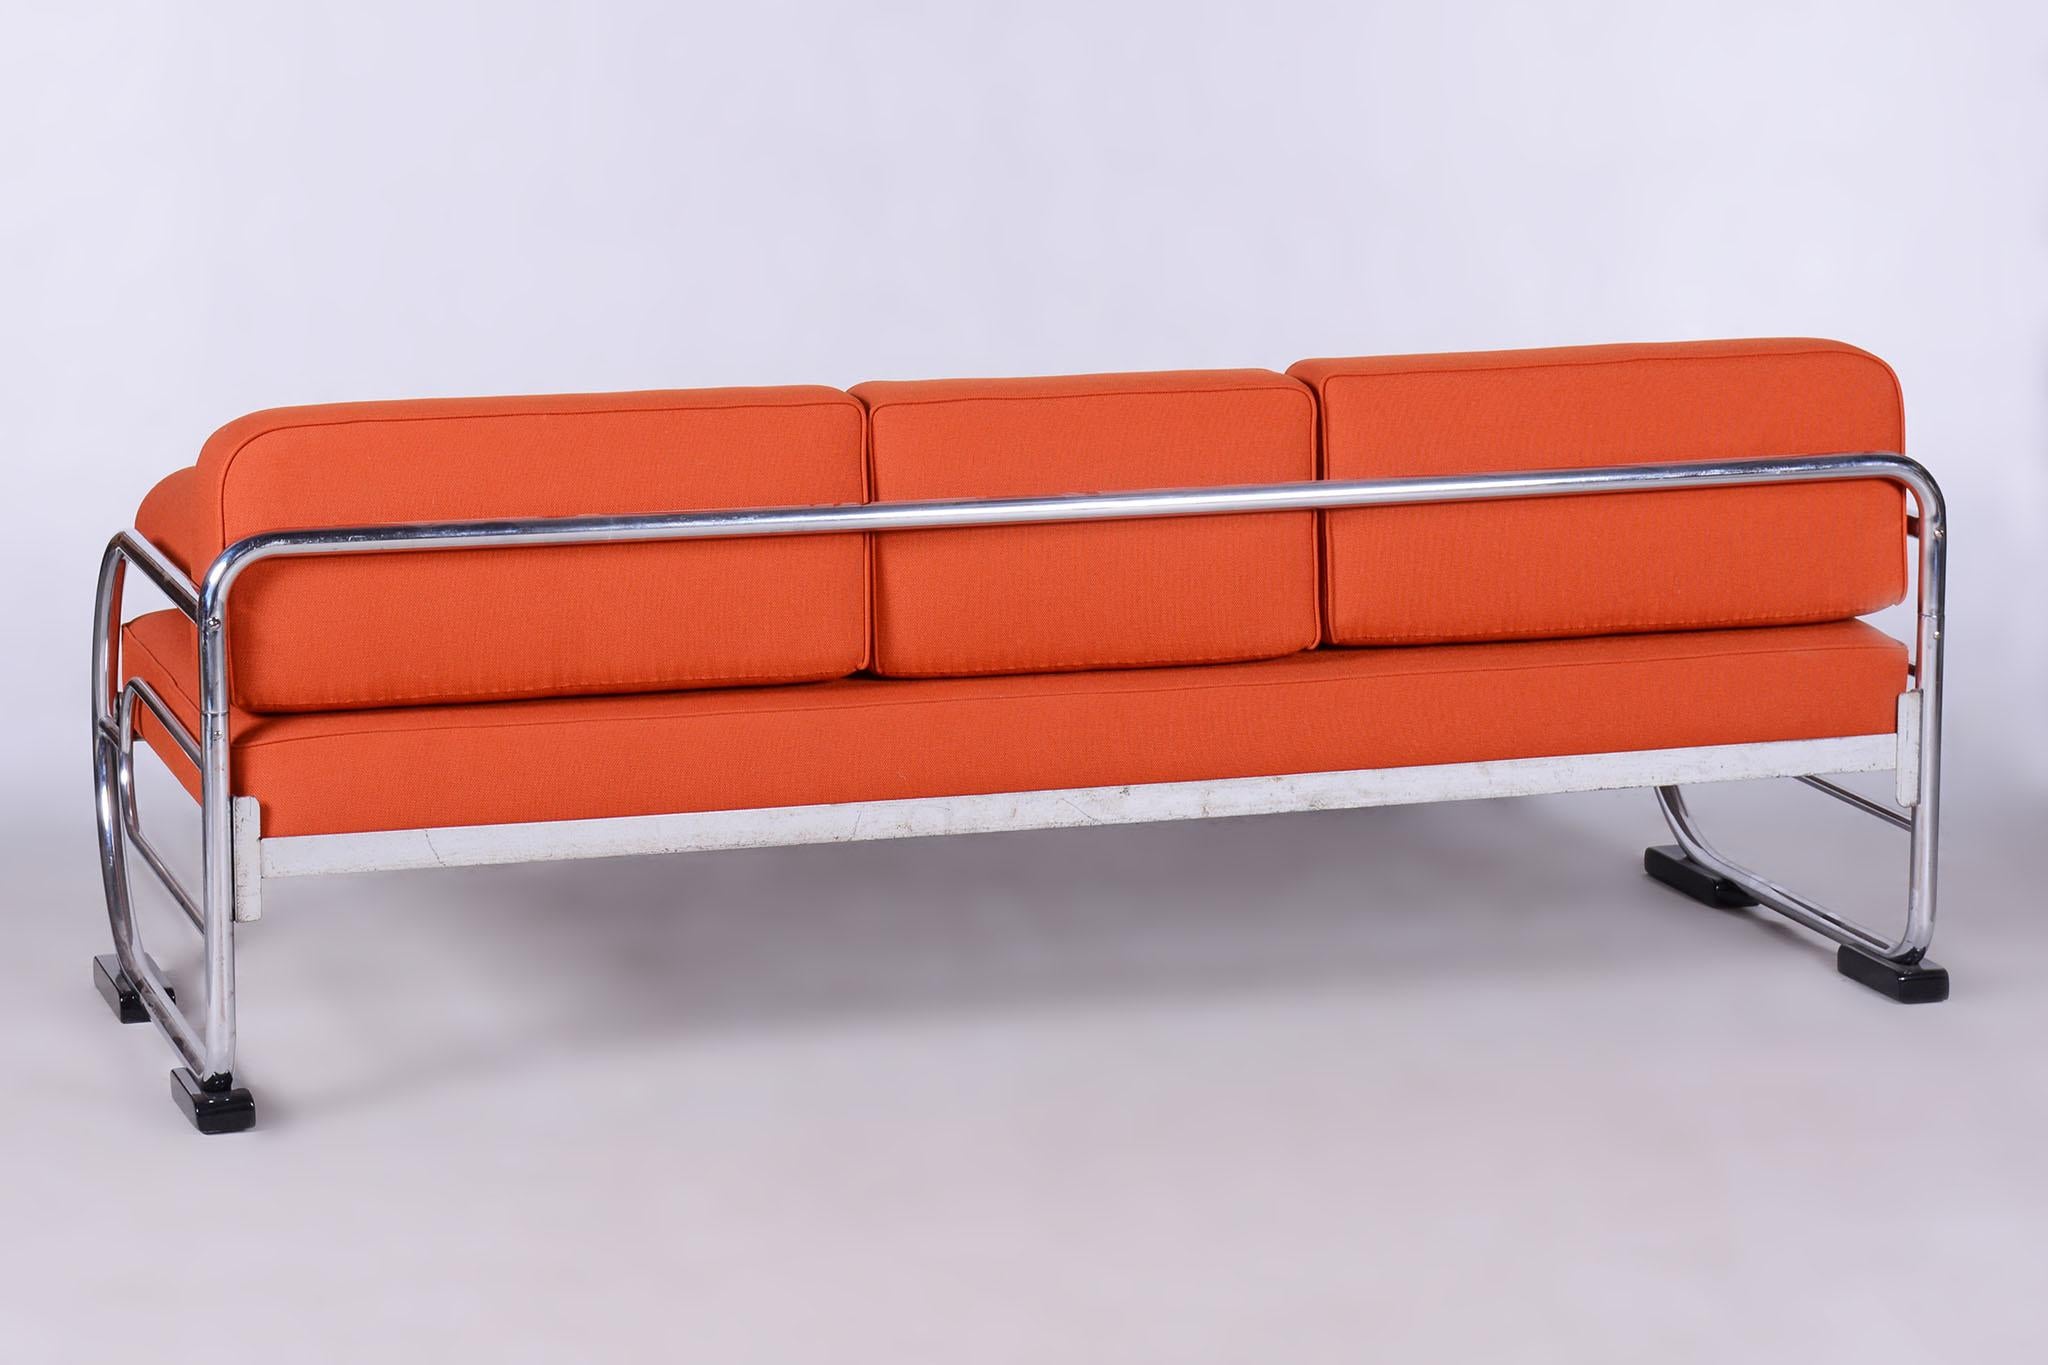 Restored Orange bauhaus sofa by Robert Slezak

Source: Czechia (Czechoslovakia)
Period: 1930-1939
Number of Seats: 3
Material: Chrome-Plated Steel, High-Quality Leather

Designed by renowned Czech designer Robert Slezak. 

It has been fully